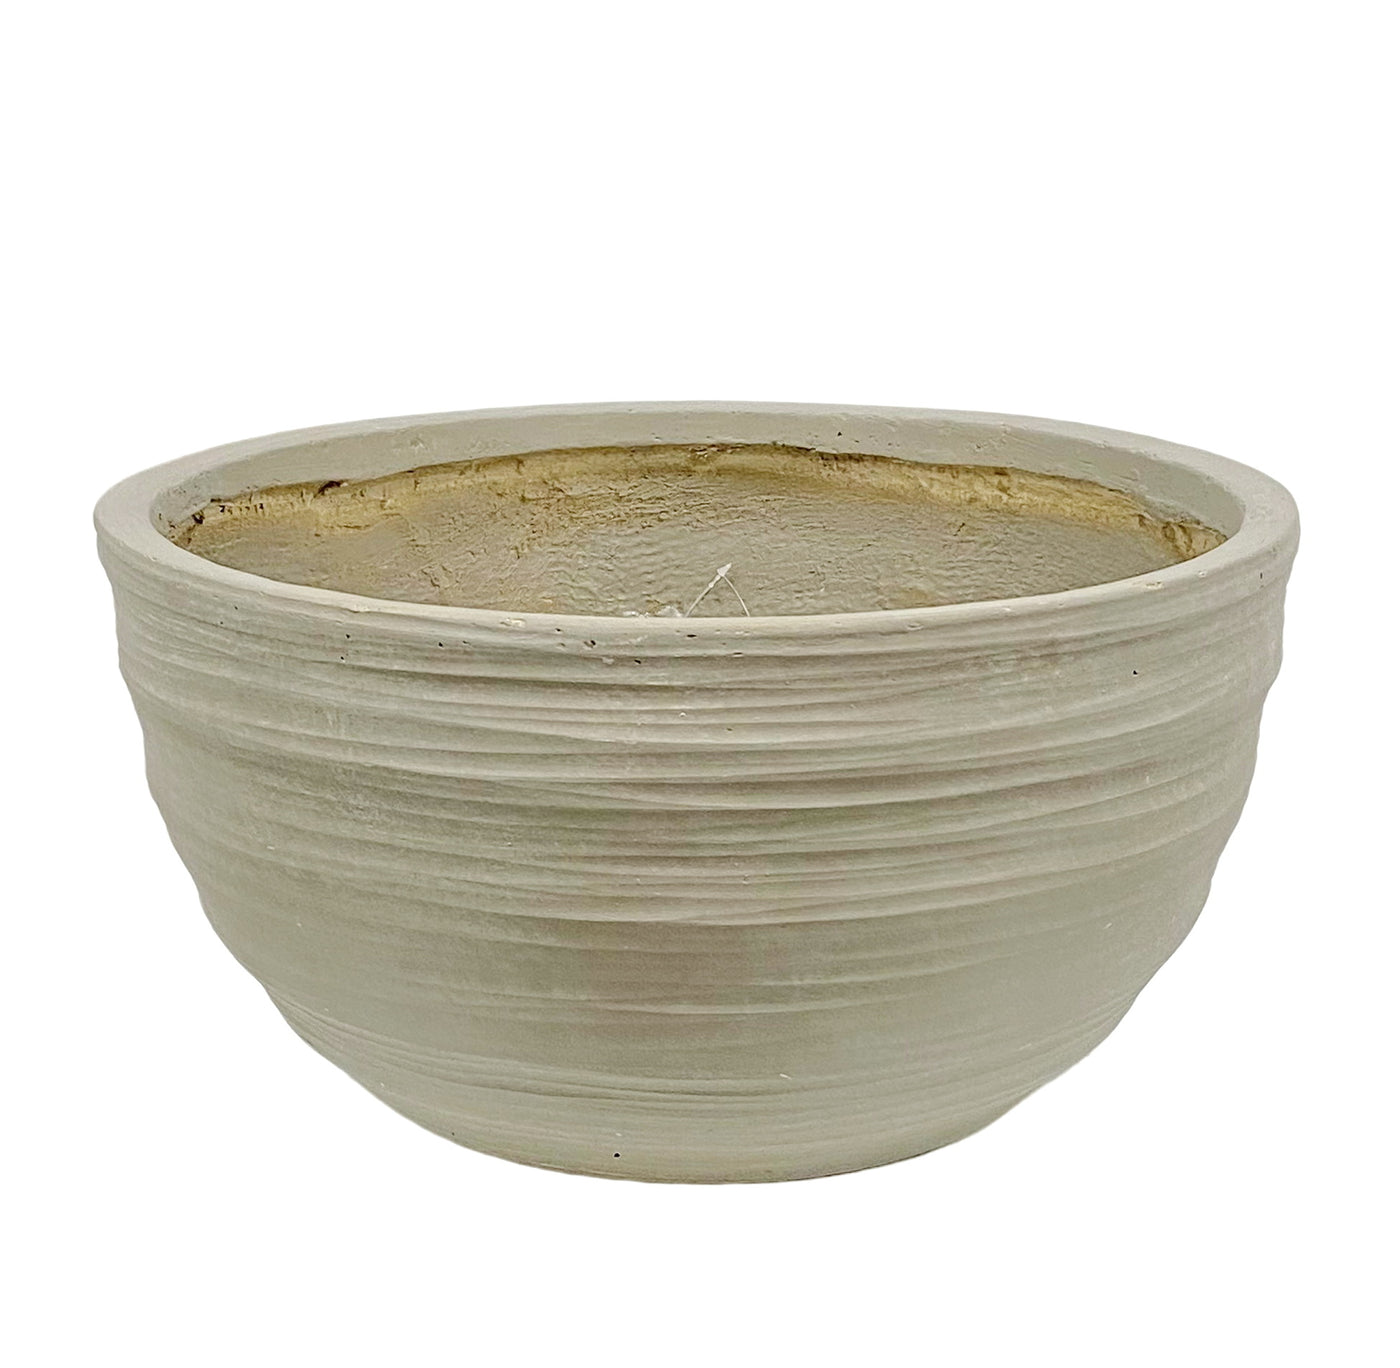 Upscale handcrafted stonecast bowl with swirling texture in natural taupe